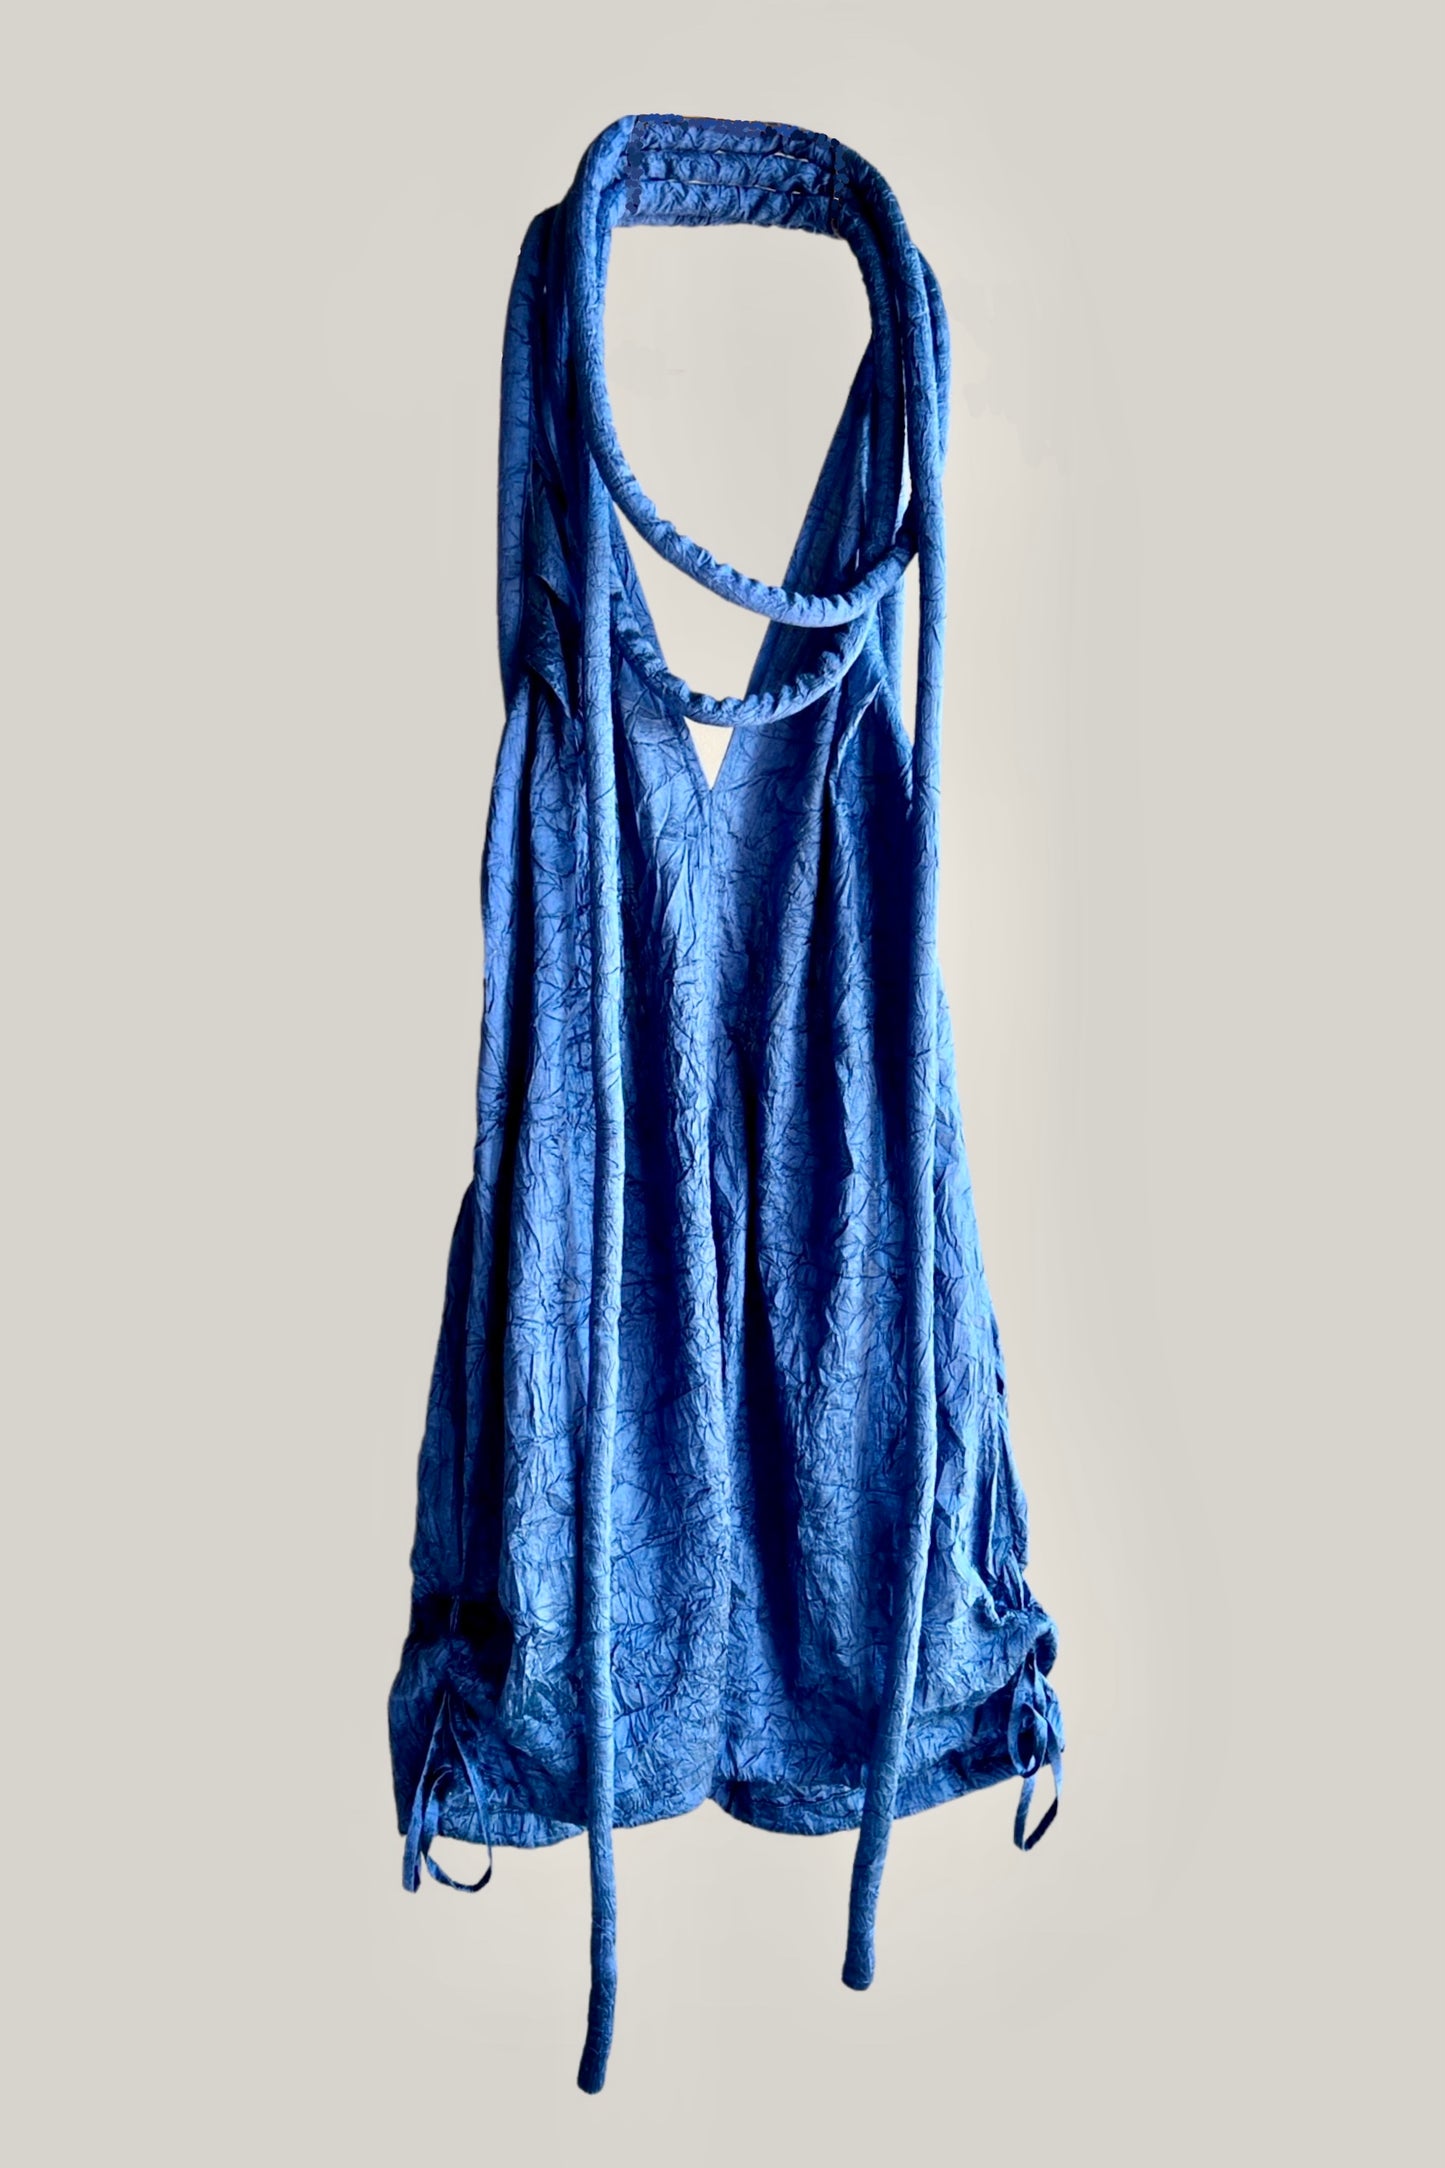 Infinite Rope Shorts Jumpsuit Sapphire Blue Crushed Silk